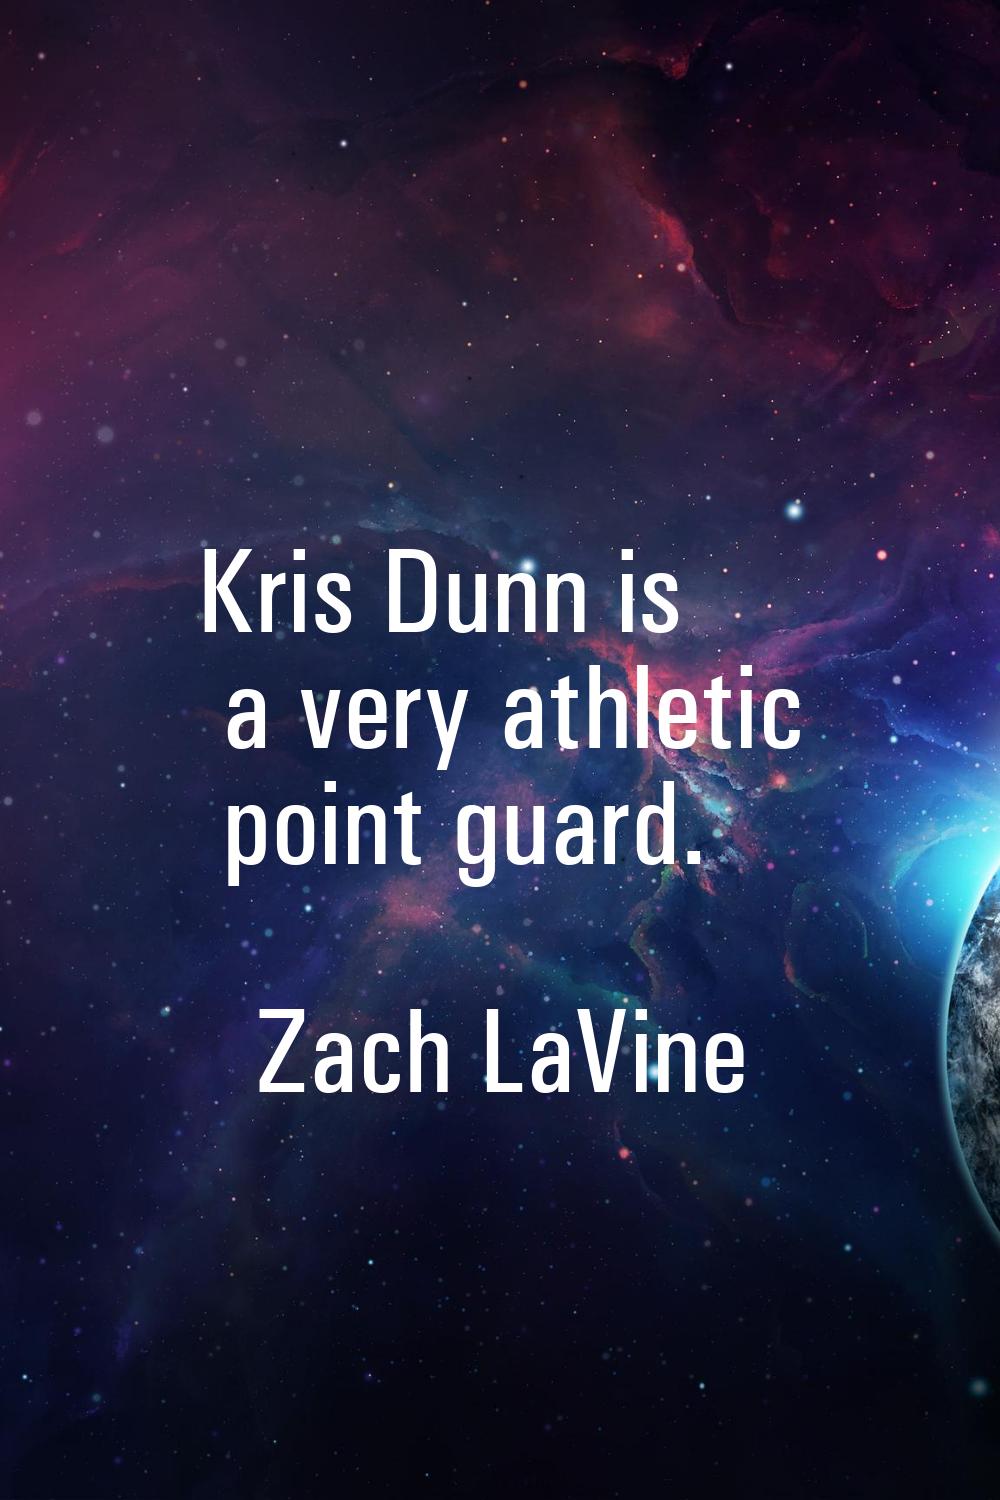 Kris Dunn is a very athletic point guard.